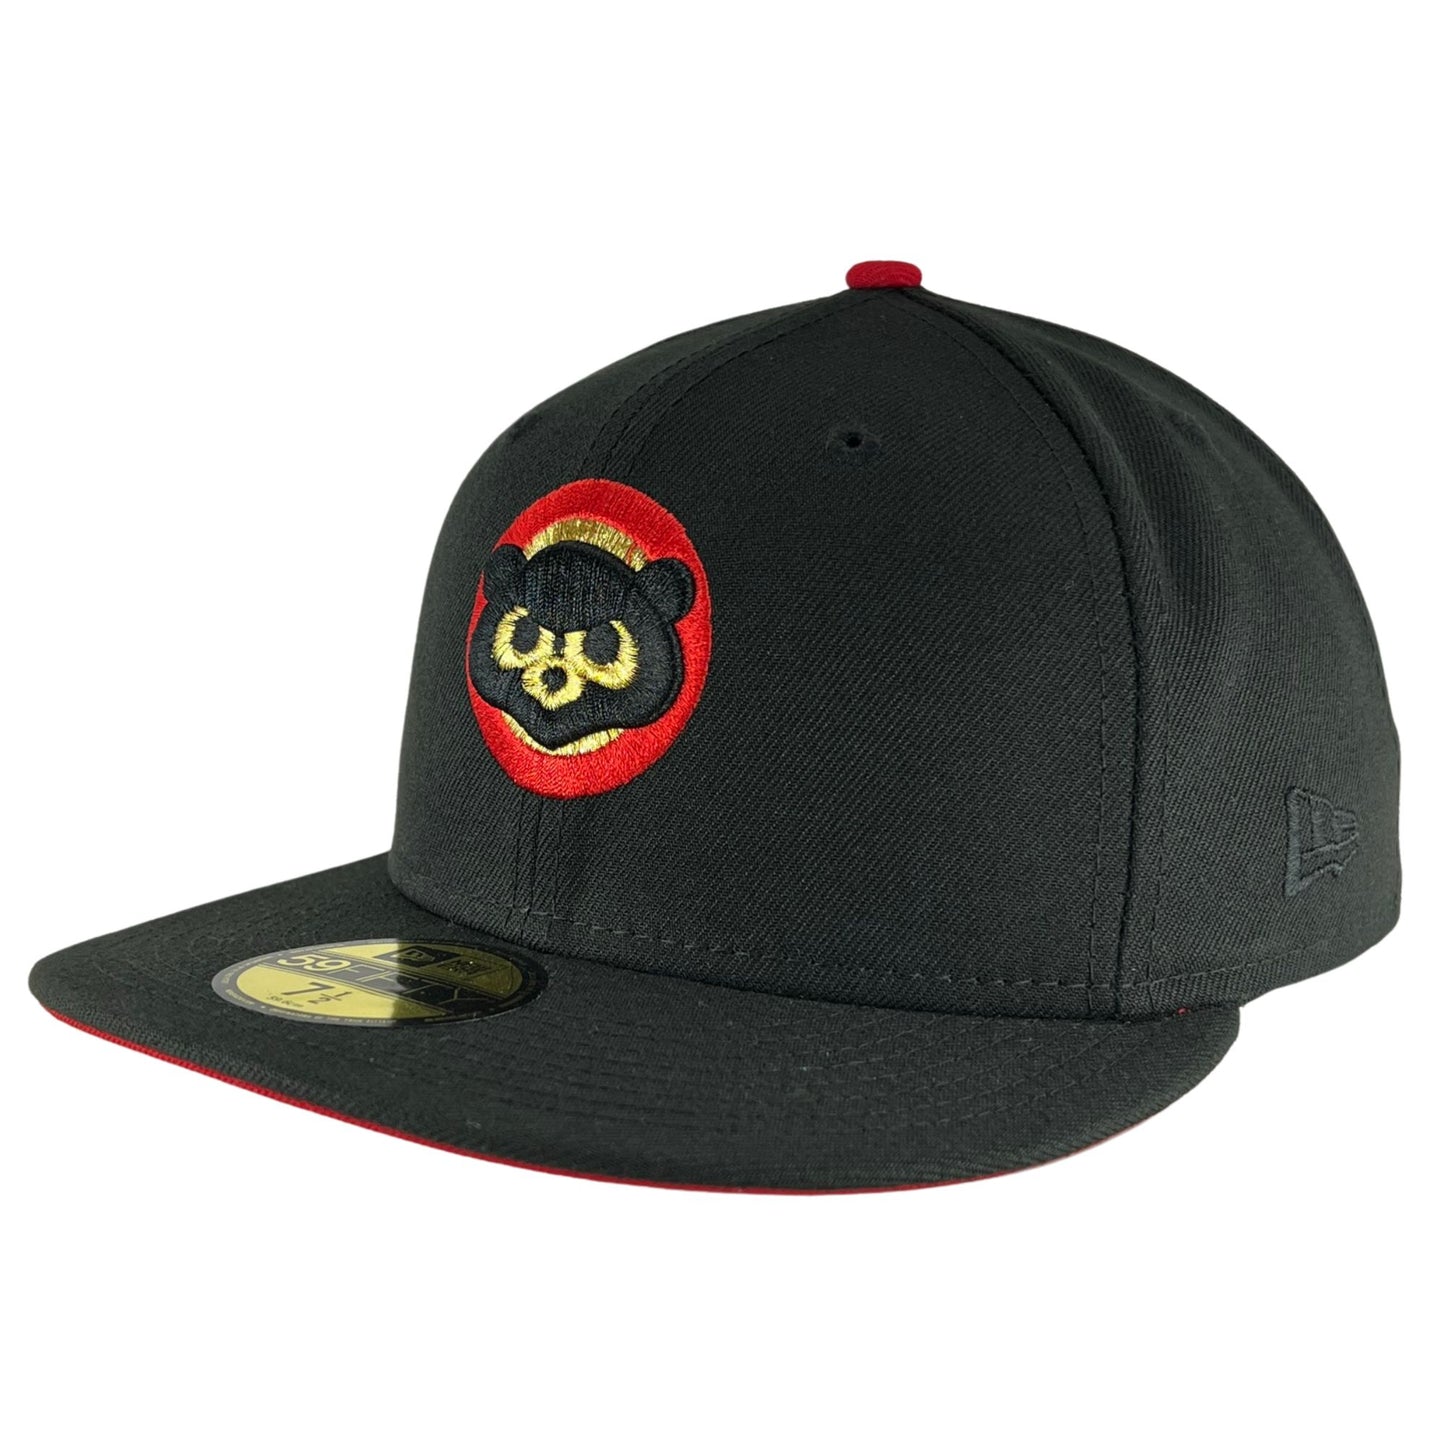 Chicago Cubs Black/Gold/Red UV 1990 ASG New Era 59FIFTY Fitted Hat